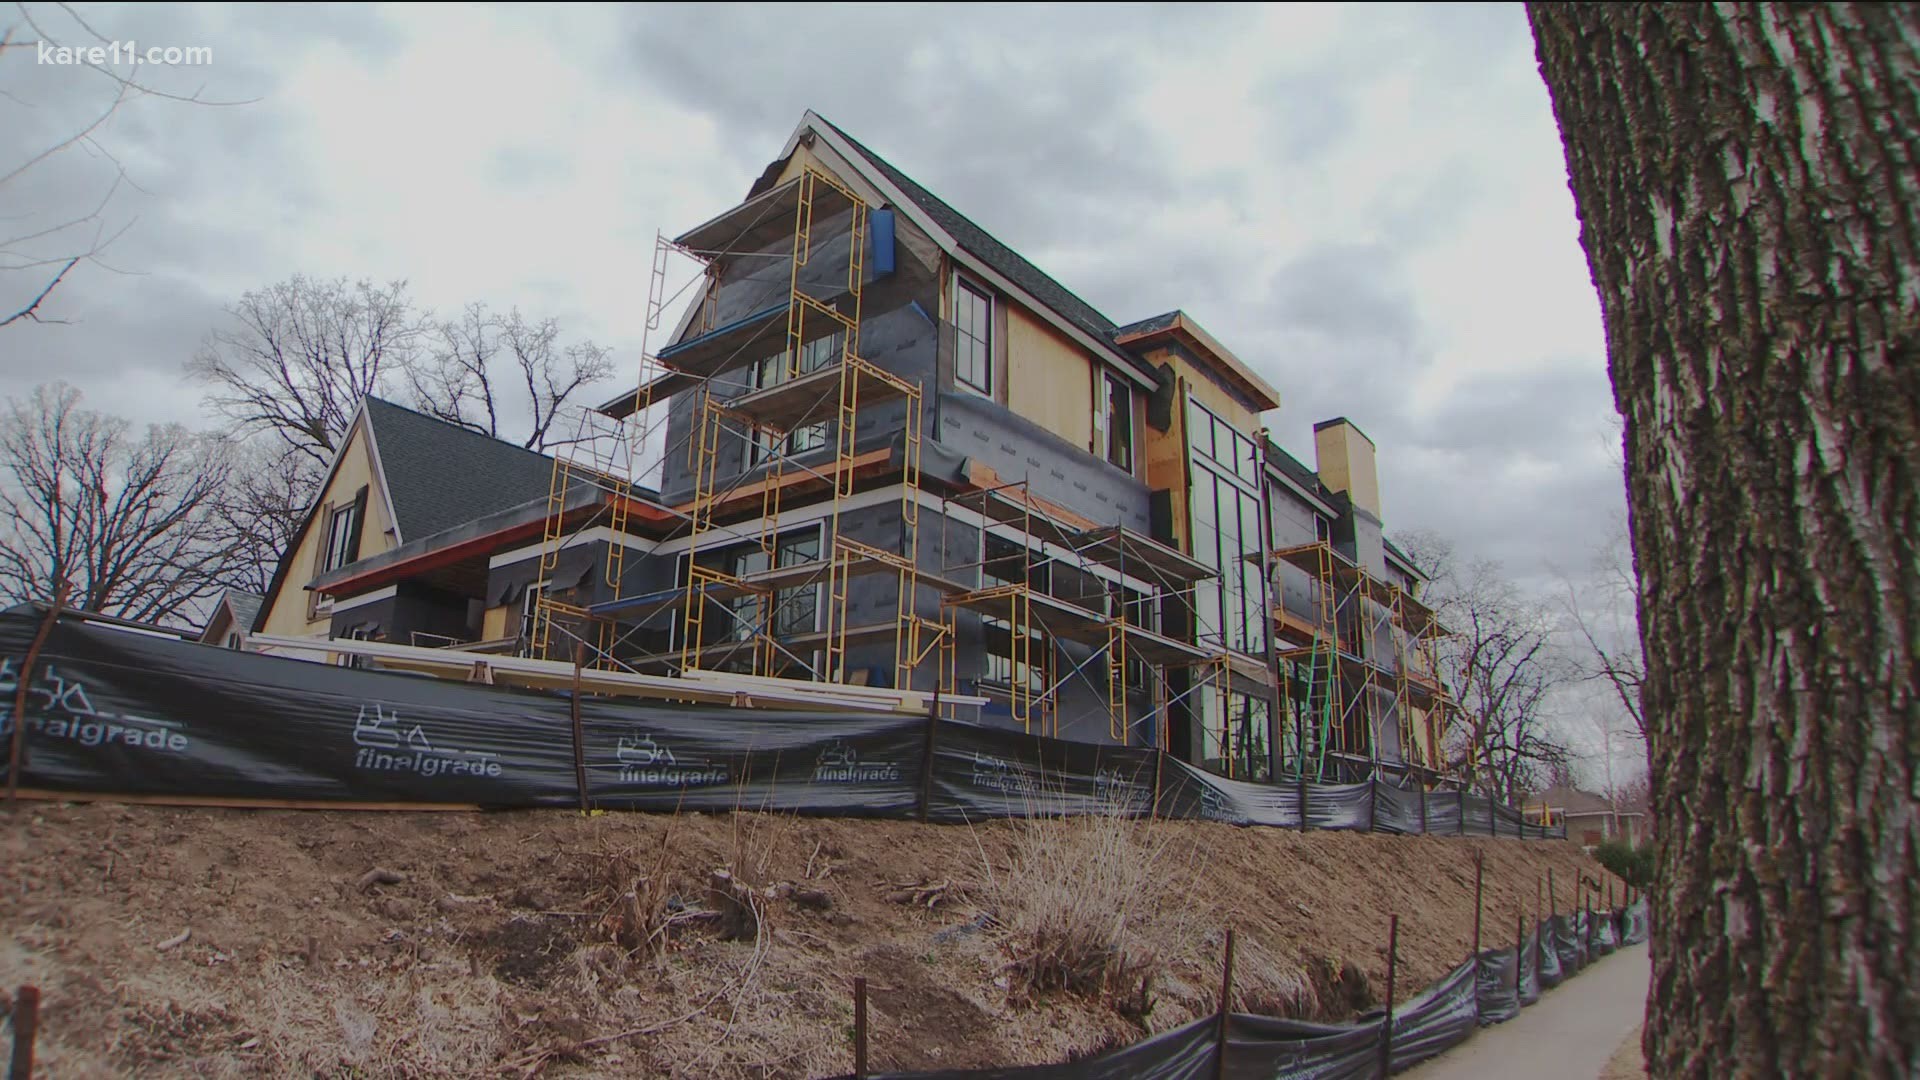 Nearly 1,000 homes in Edina have been demolished since 2008.